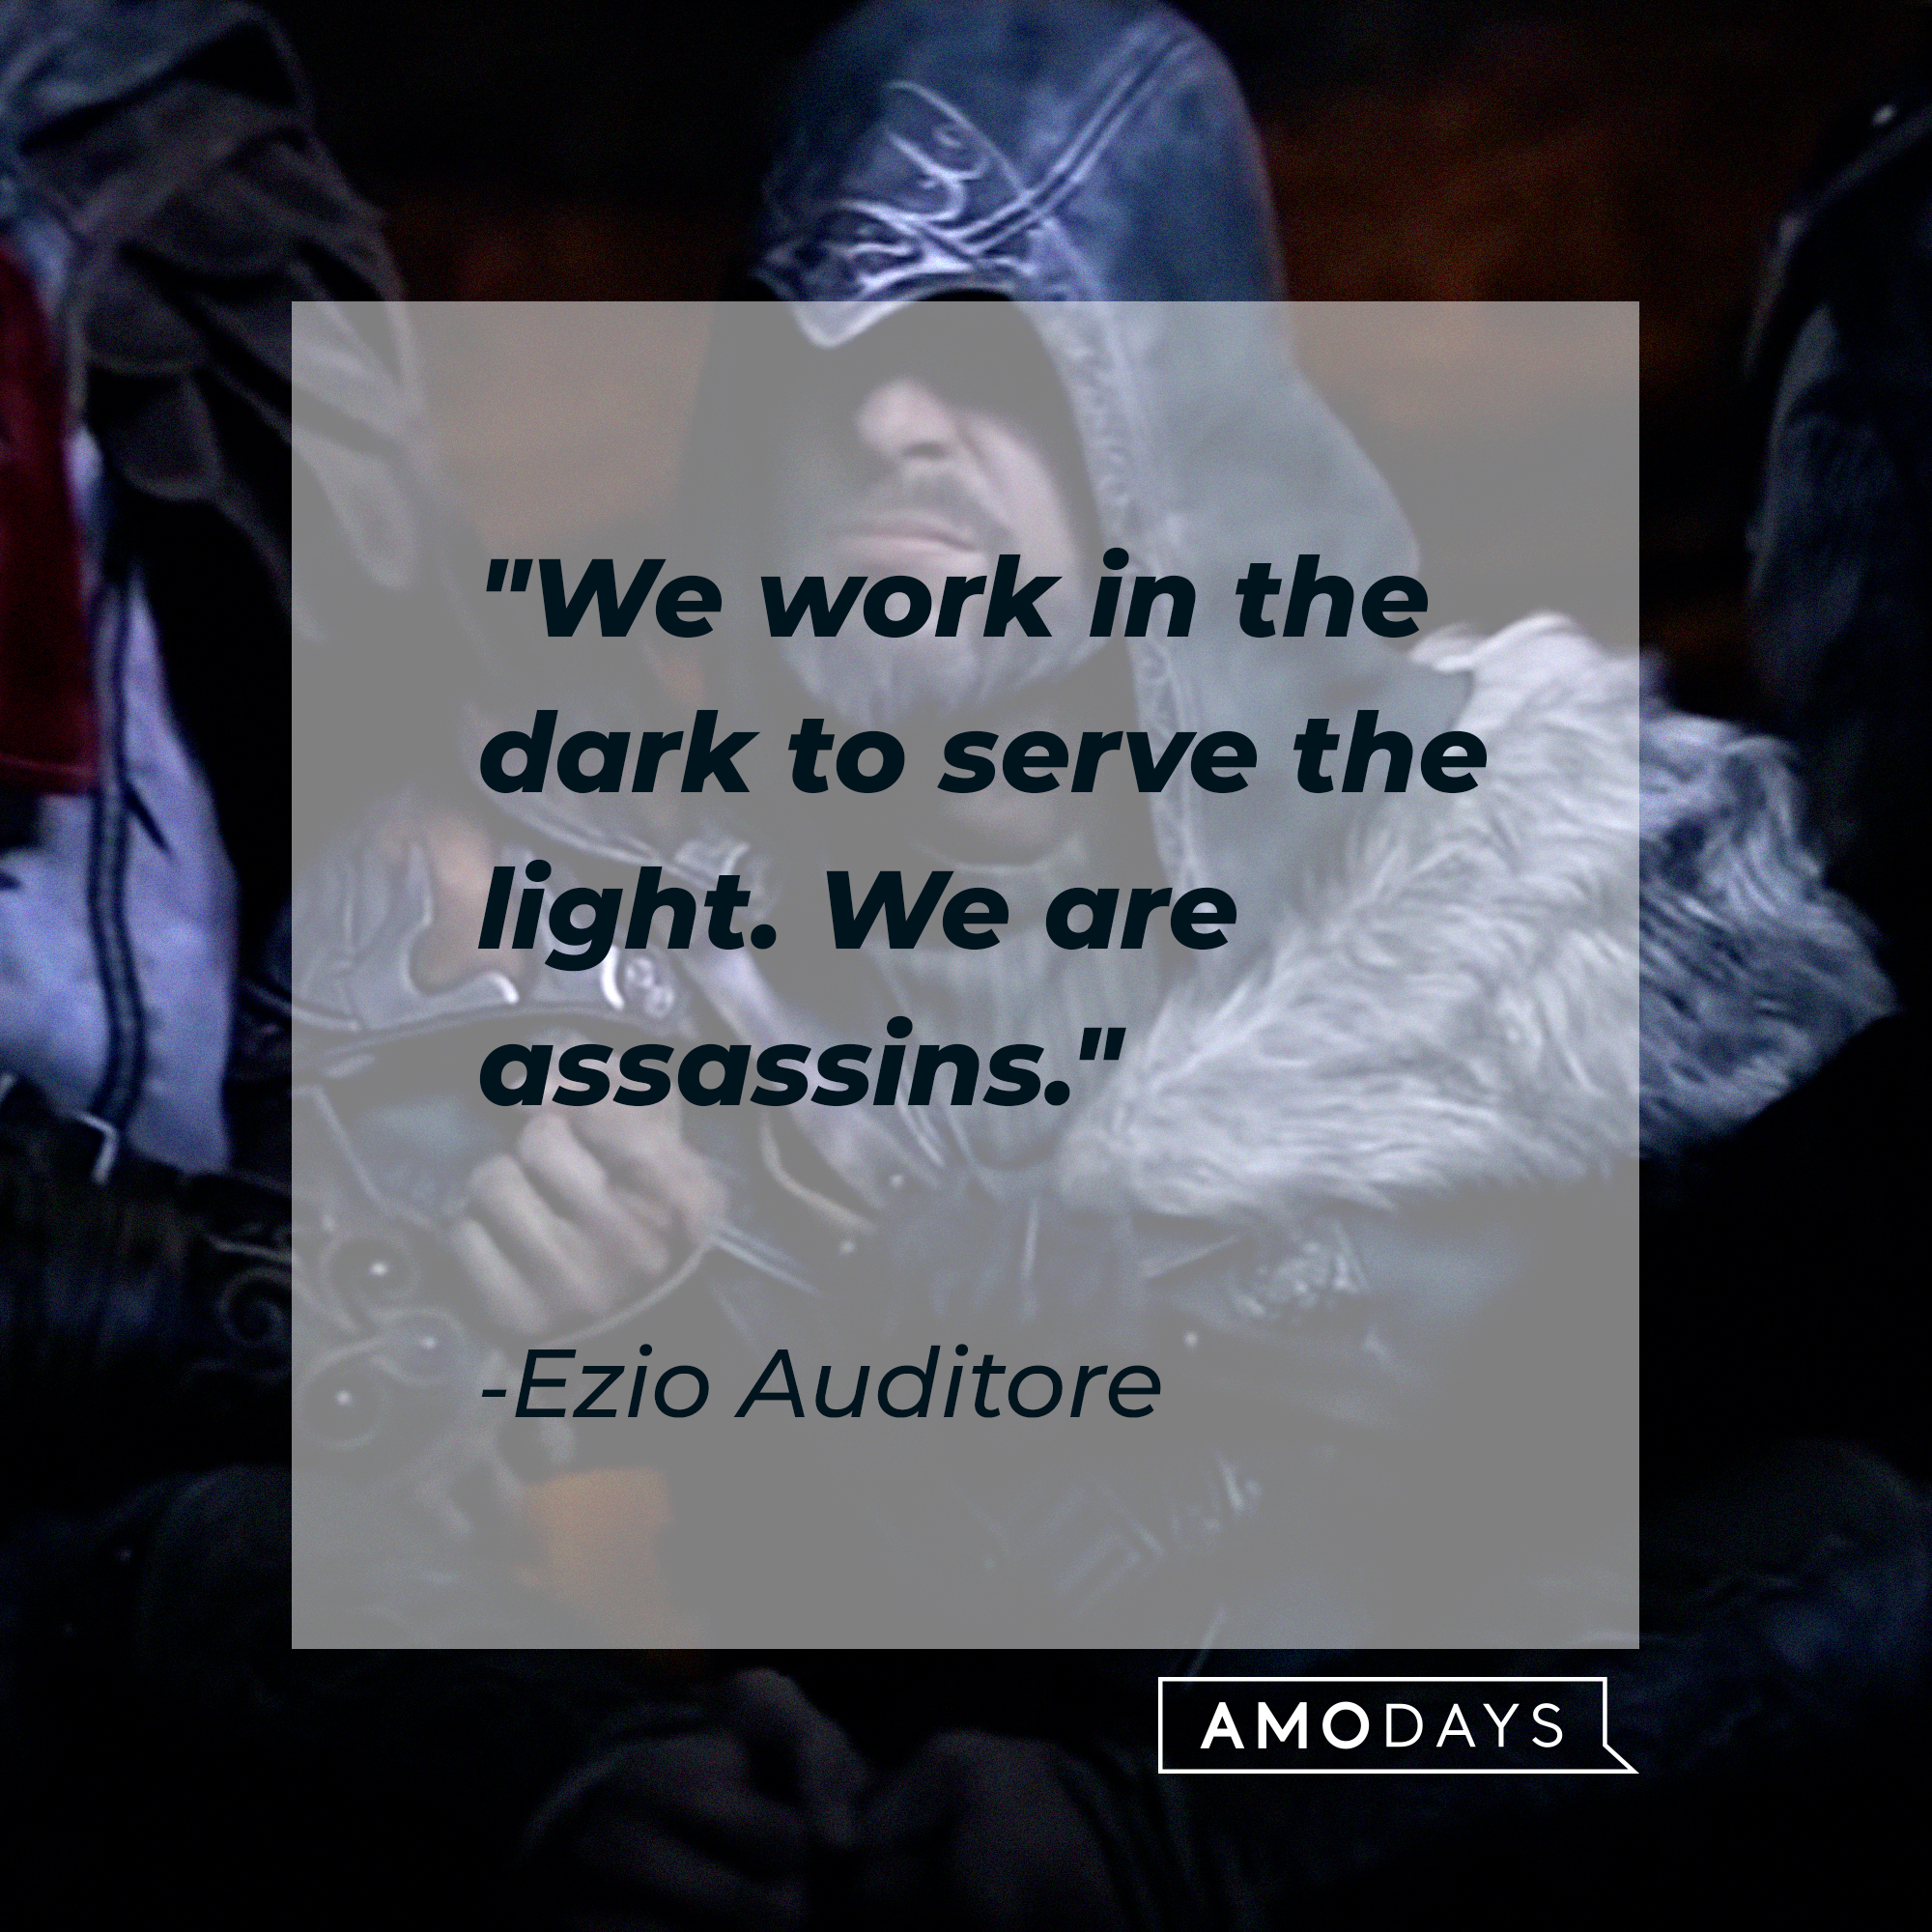 Enzo Auditore's quote: "We work in the dark to serve the light. We are assassins." | Source: youtube.com/UbisoftNA